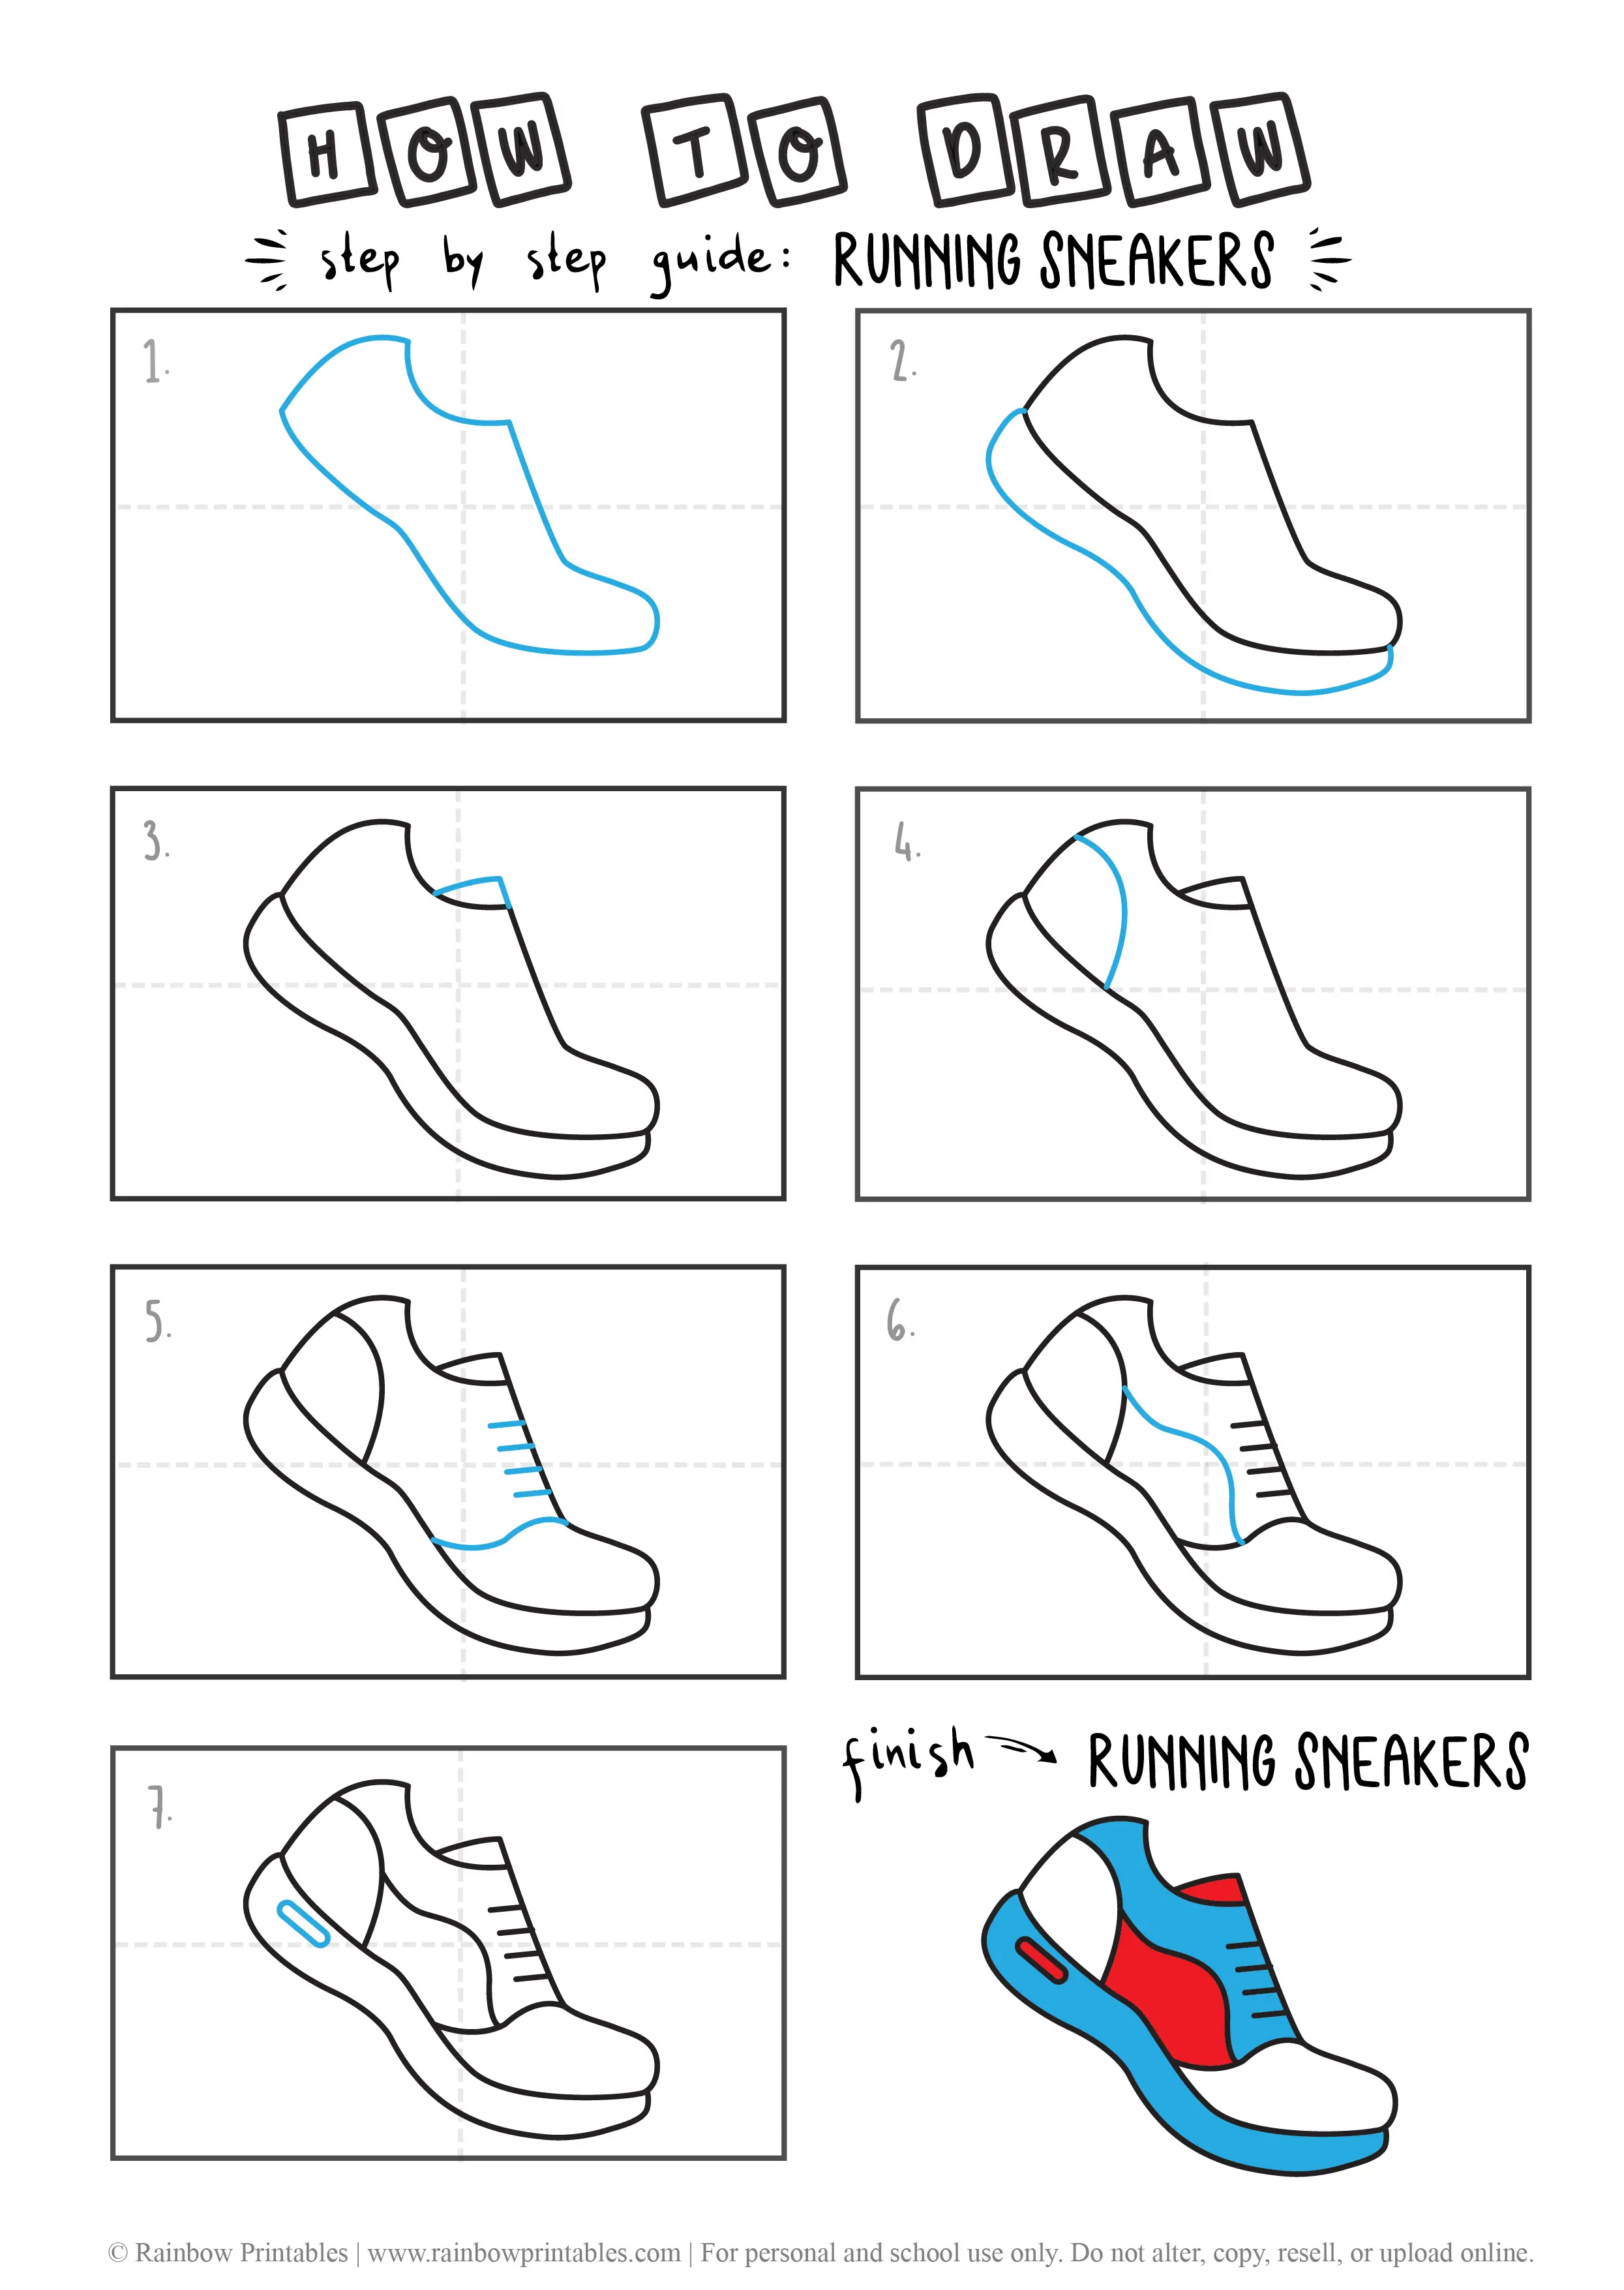 HOW TO DRAW A RUNNING SNEAKER SHOES ALTHETIC FITNESS CLOTHING GUIDE ILLUSTRATION STEP BY STEP EASY SIMPLE FOR KIDS